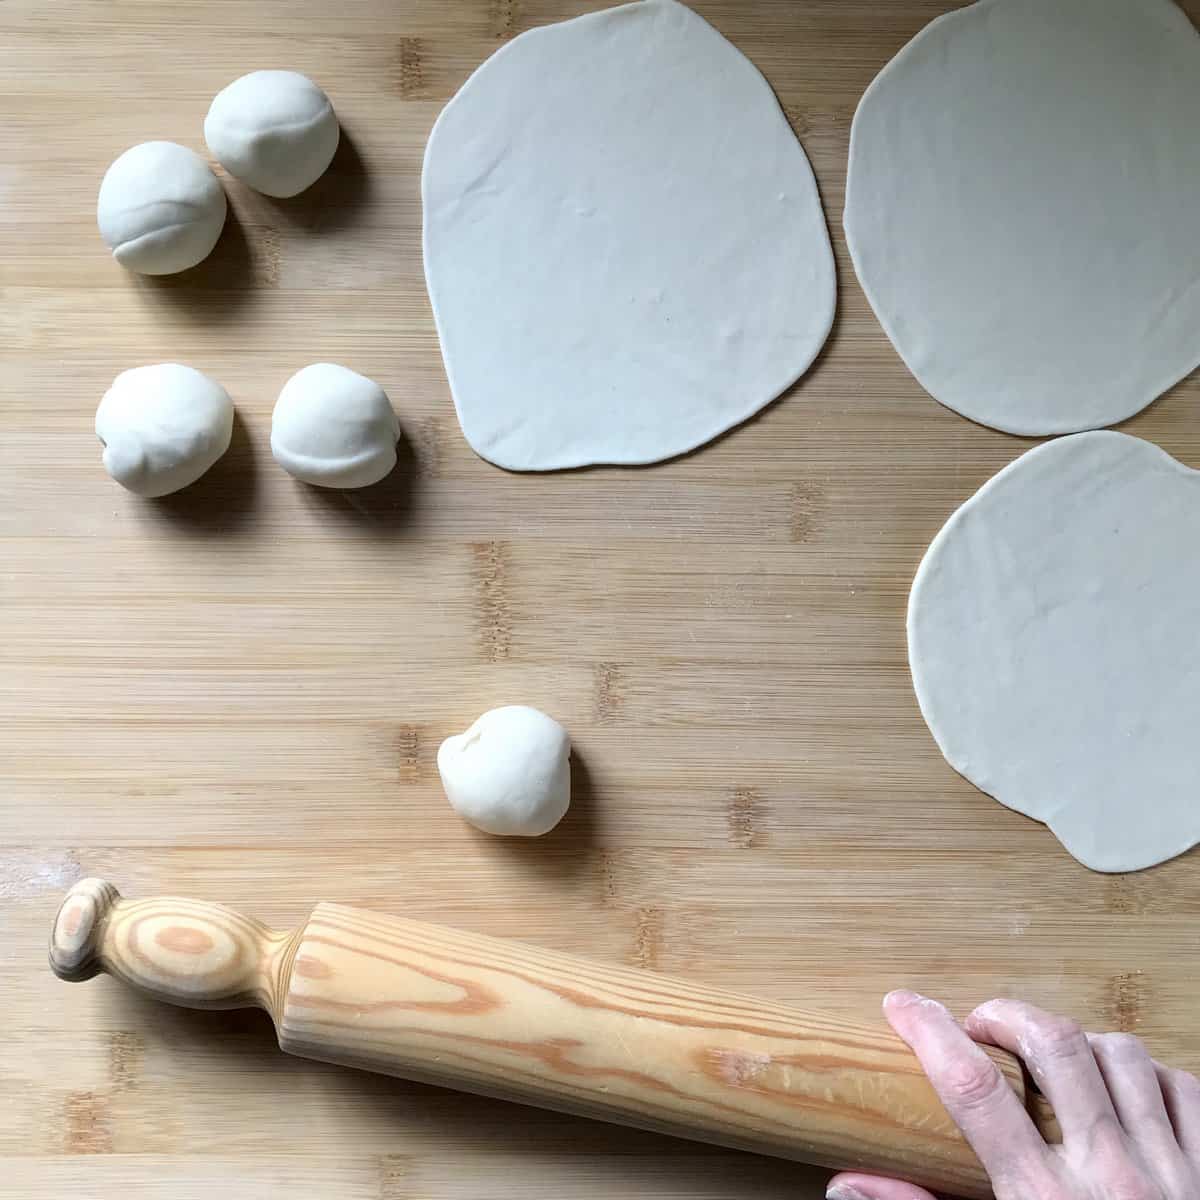 A rolling pin next to balls of dough on a wooden board.